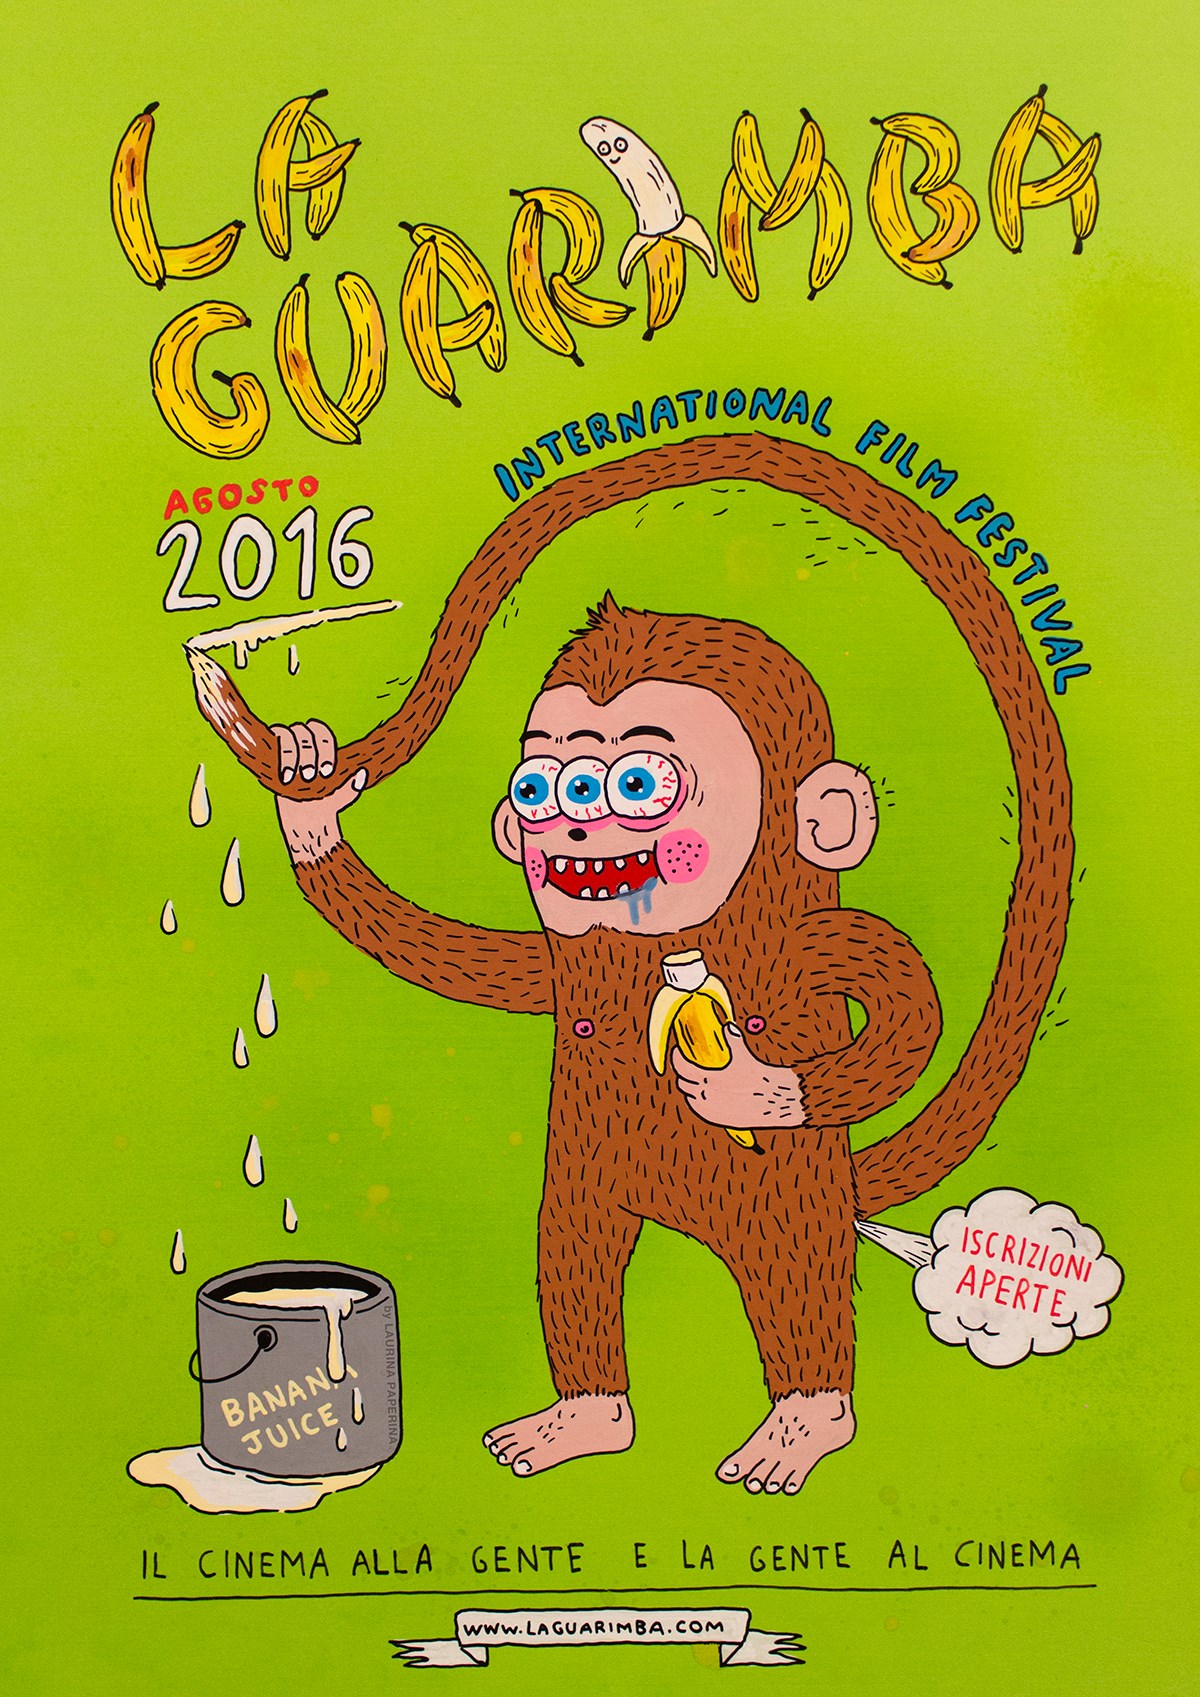 30 Artists, 1 Monkey, and An Incredible Collection of Illustrated Posters -  Doodlers Anonymous